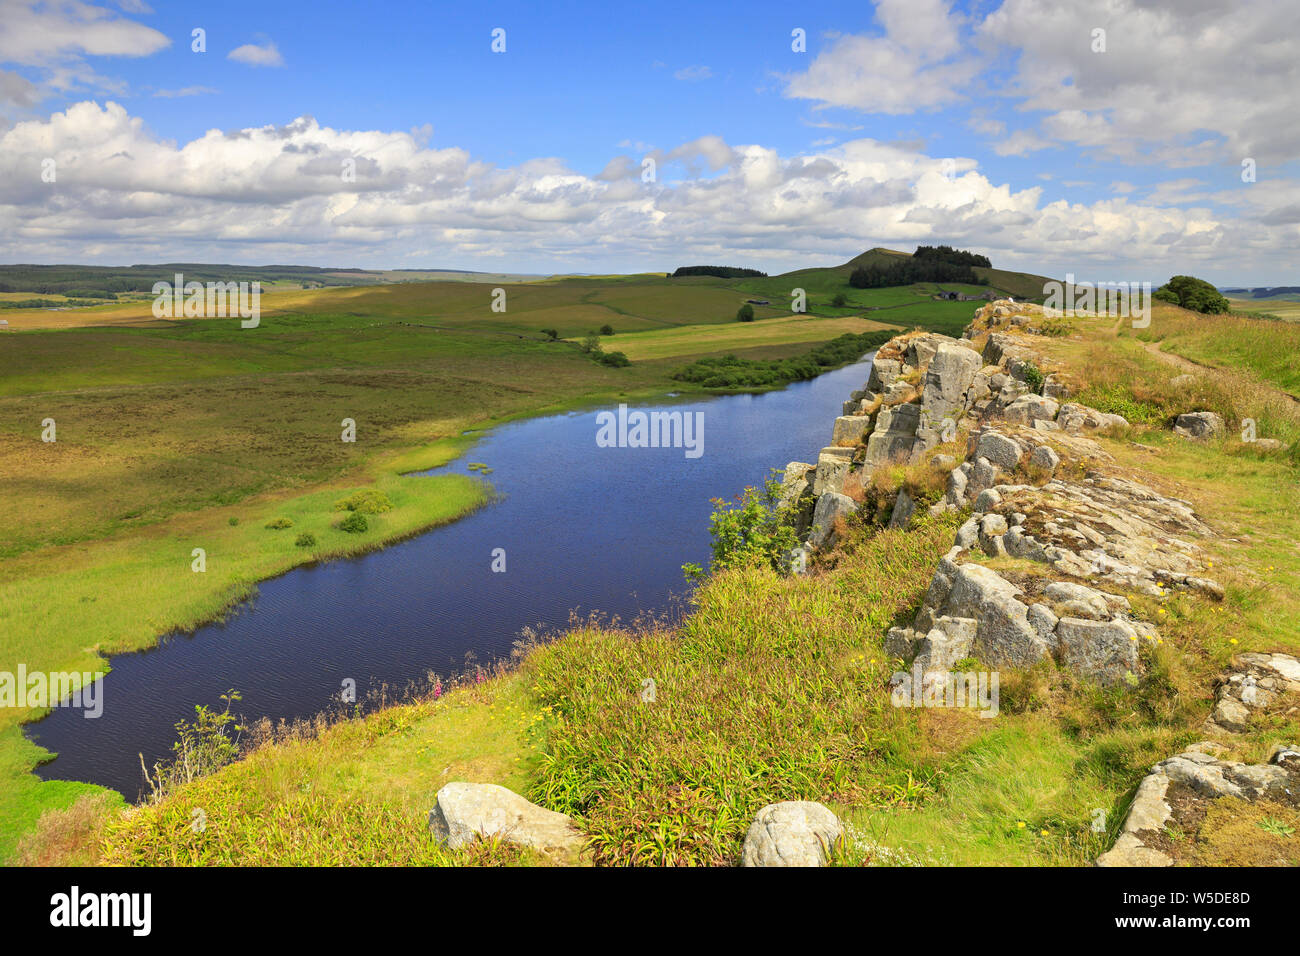 Crag Lough from Hadrian's Wall, UNESCO World Heritage Site, Hadrian's Wall path, near Hexham, Northumberland, Northumberland National Park, England. Stock Photo